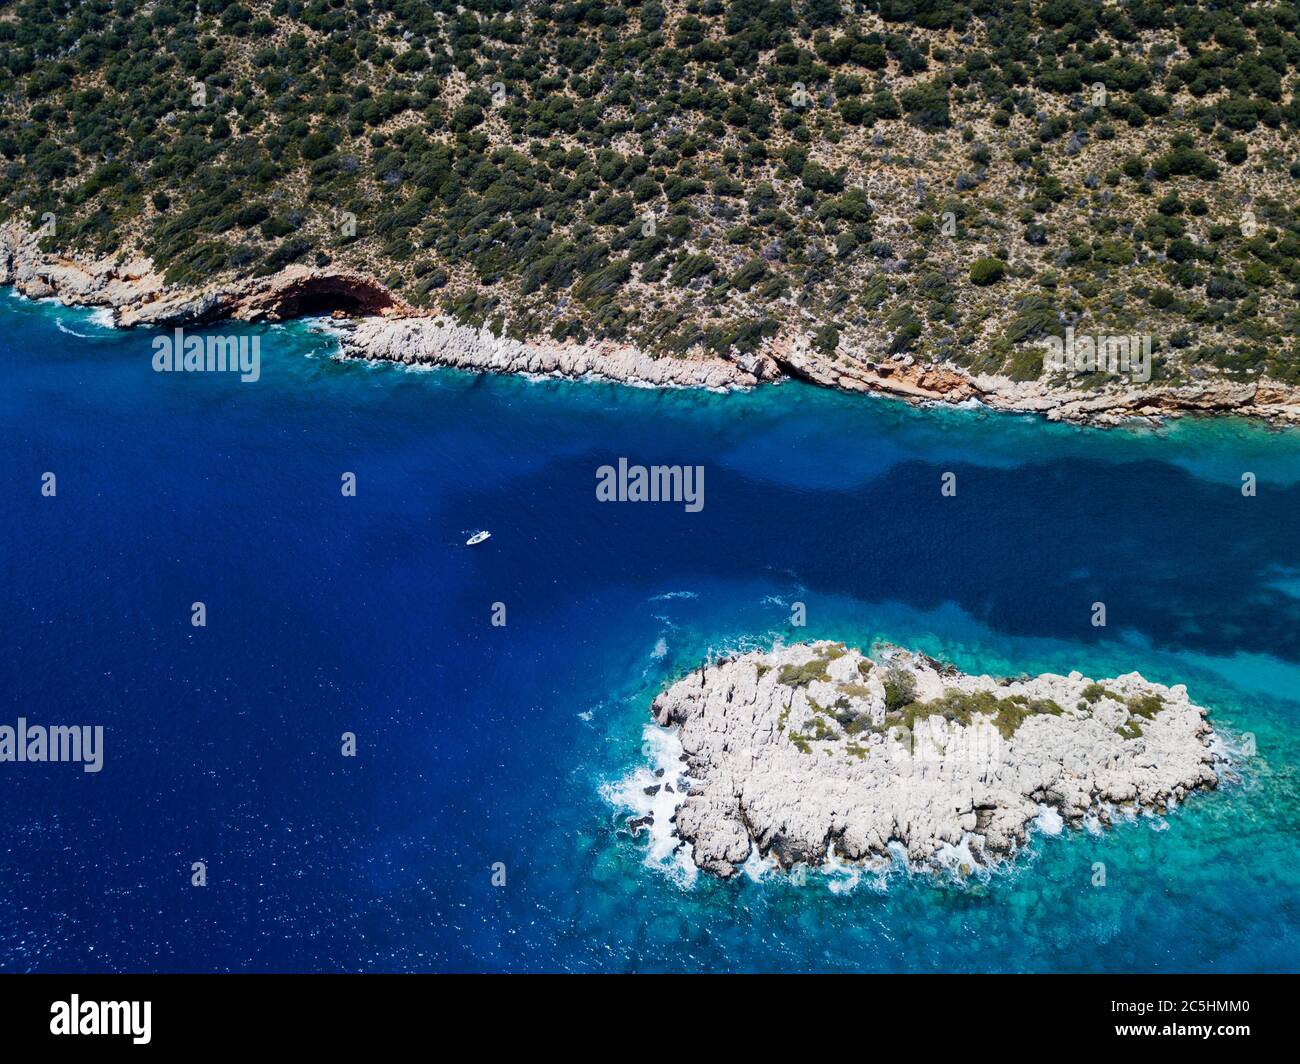 Aerial view of seagrass, Posidonia oceanica, beds in Kas-Kekova Marine Protected Area Antalya Turkey Stock Photo